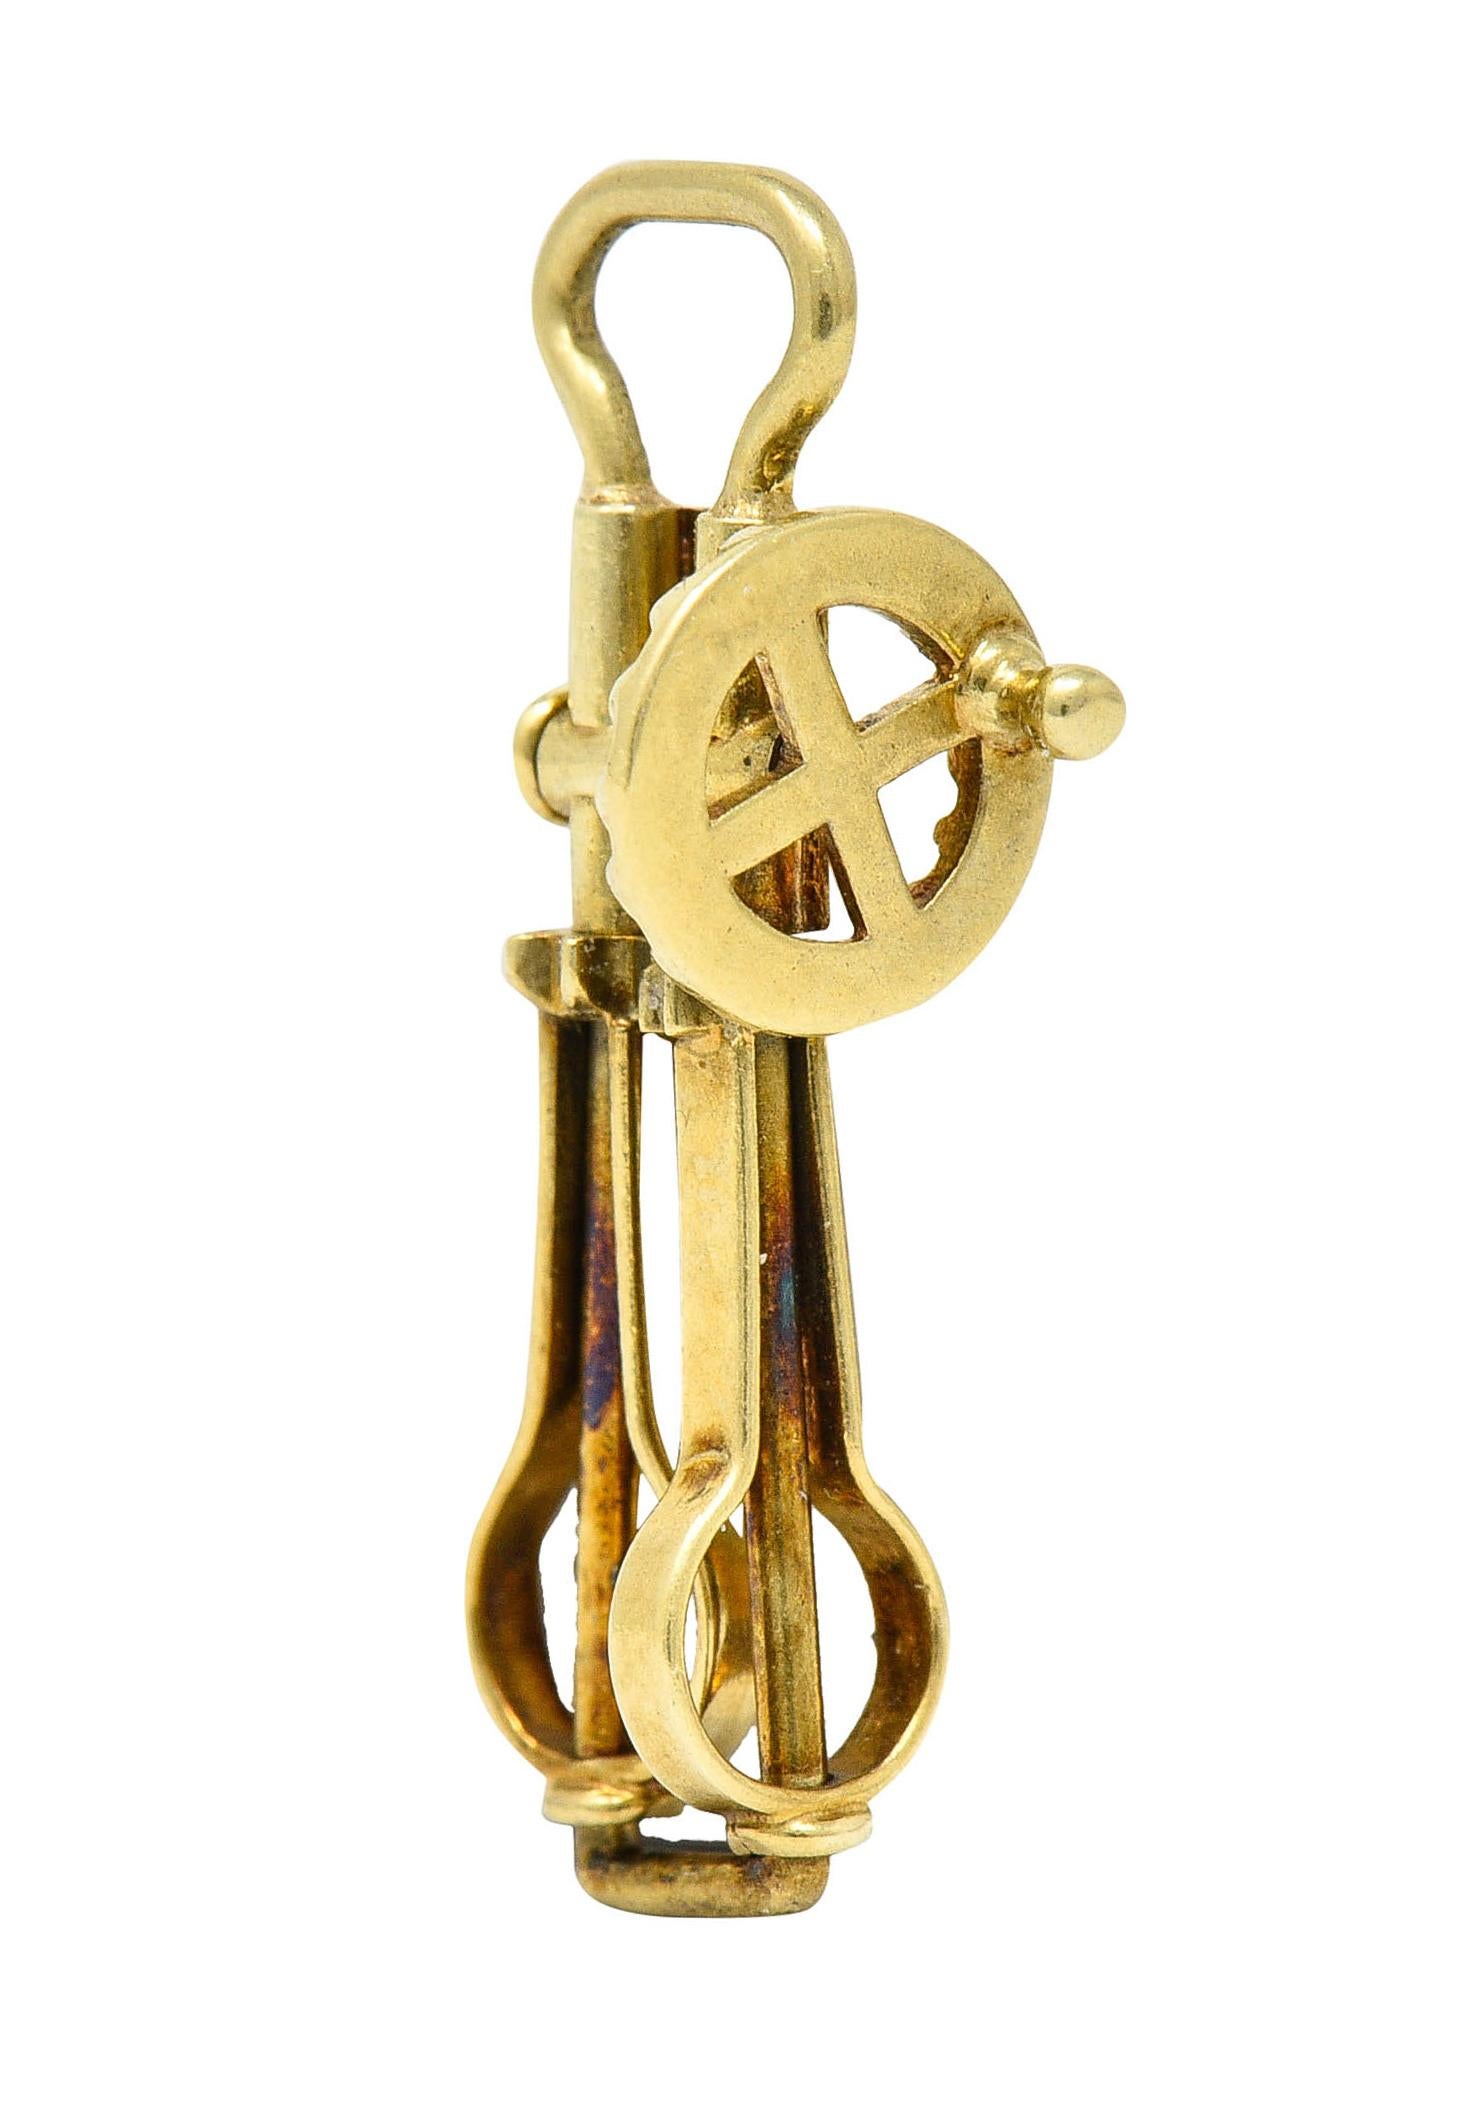 Charm is designed as a vintage style hand mixer

With a functional circular crank that rotates both beaters

Stamped 14K for 14 karat gold

With maker's mark for Sloan & Co.

Circa: 1940s

Measures: 3/8 x 15/16 inch

Total weight: 1.4